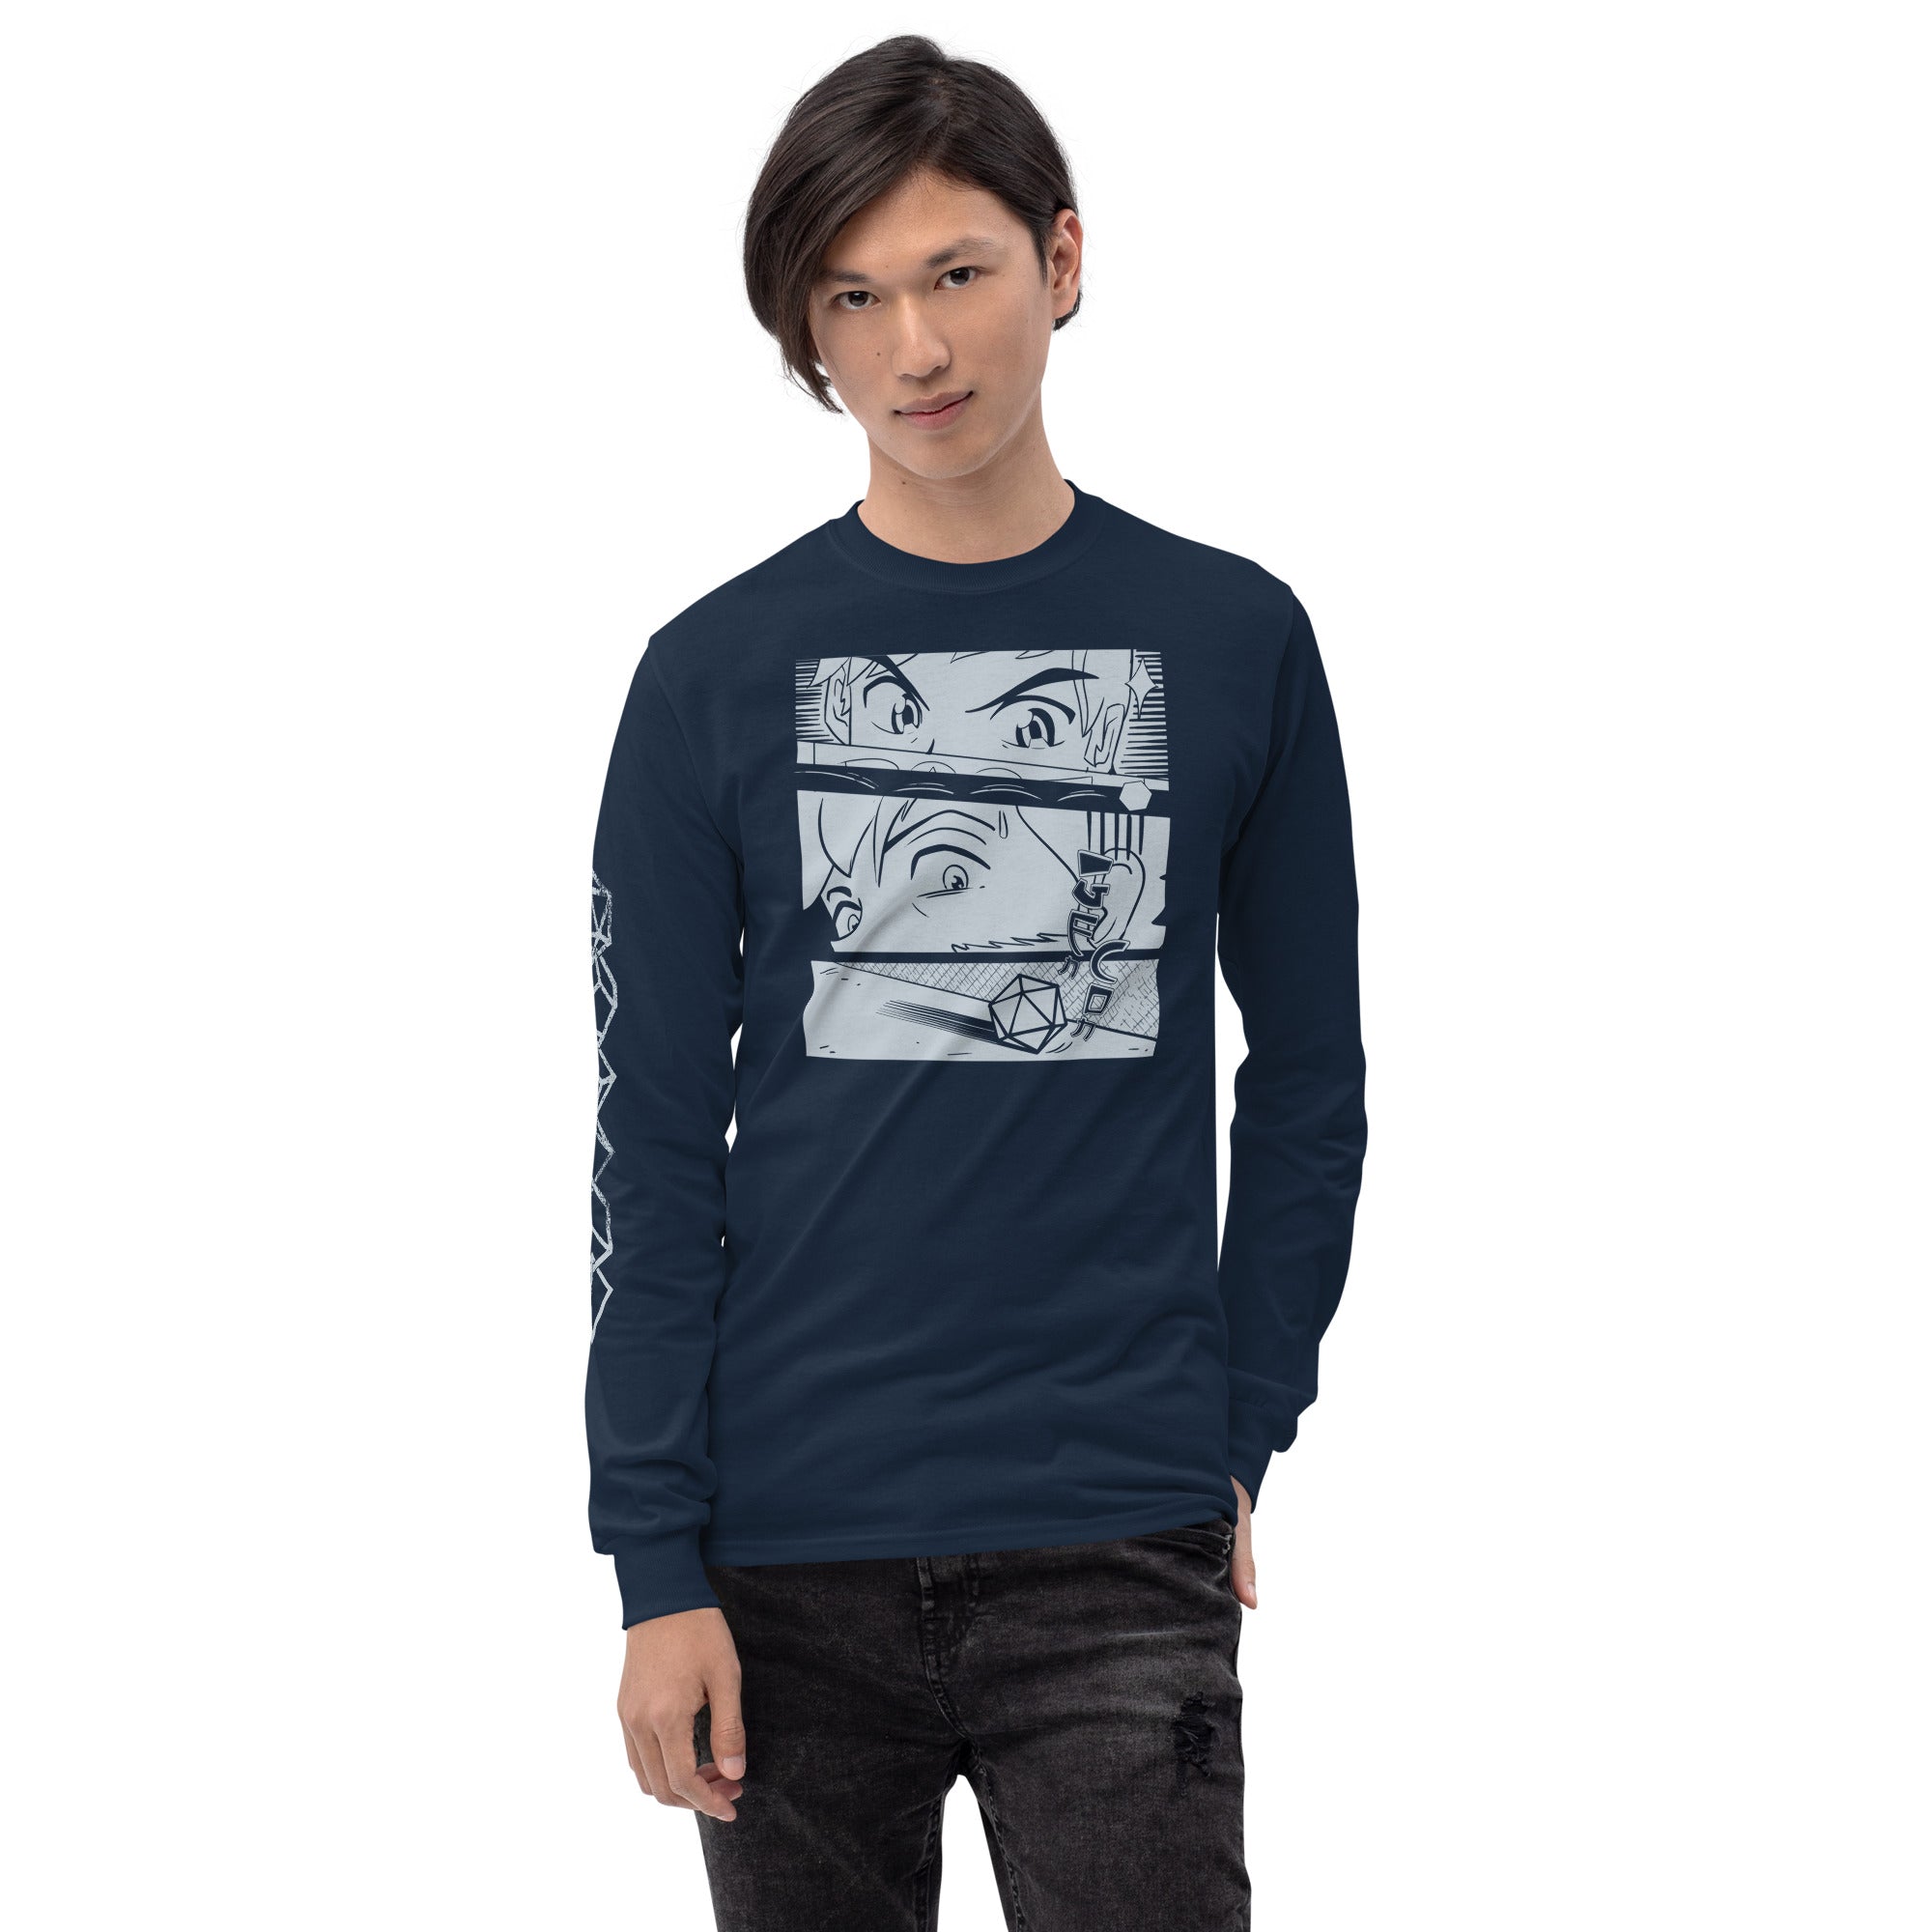 Gen Con Anime Style Triptych Long Sleeve Shirt